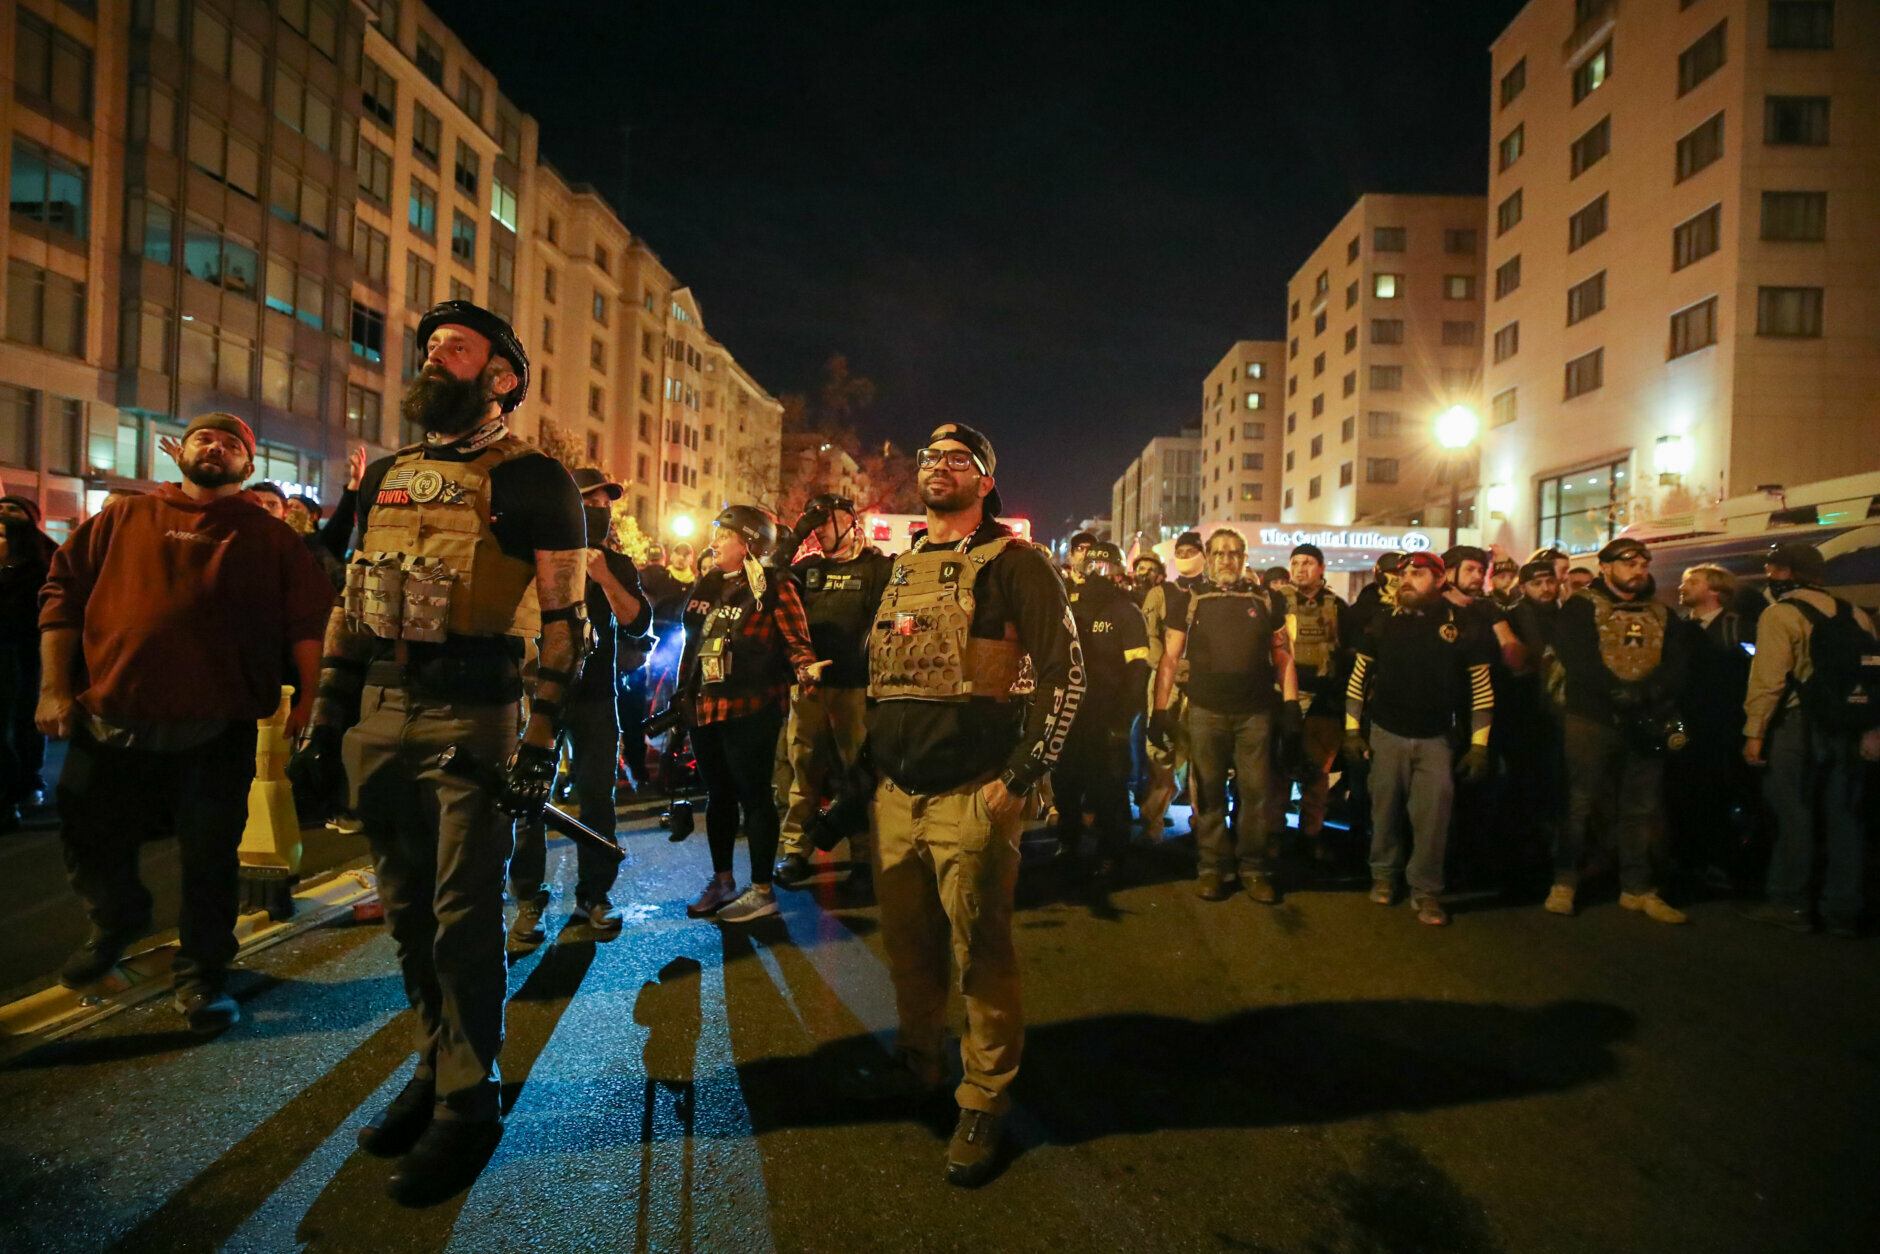 WASHINGTON, USA - DECEMBER 12: Proud Boys take streets after the "Million MAGA March" from Freedom Plaza to the US Capitol in Washington, DC, United States on December 12, 2020. Rally held to back President Donald Trump's unsubstantiated claims of voter fraud in the US election. (Photo by Tayfun Coskun/Anadolu Agency via Getty Images)